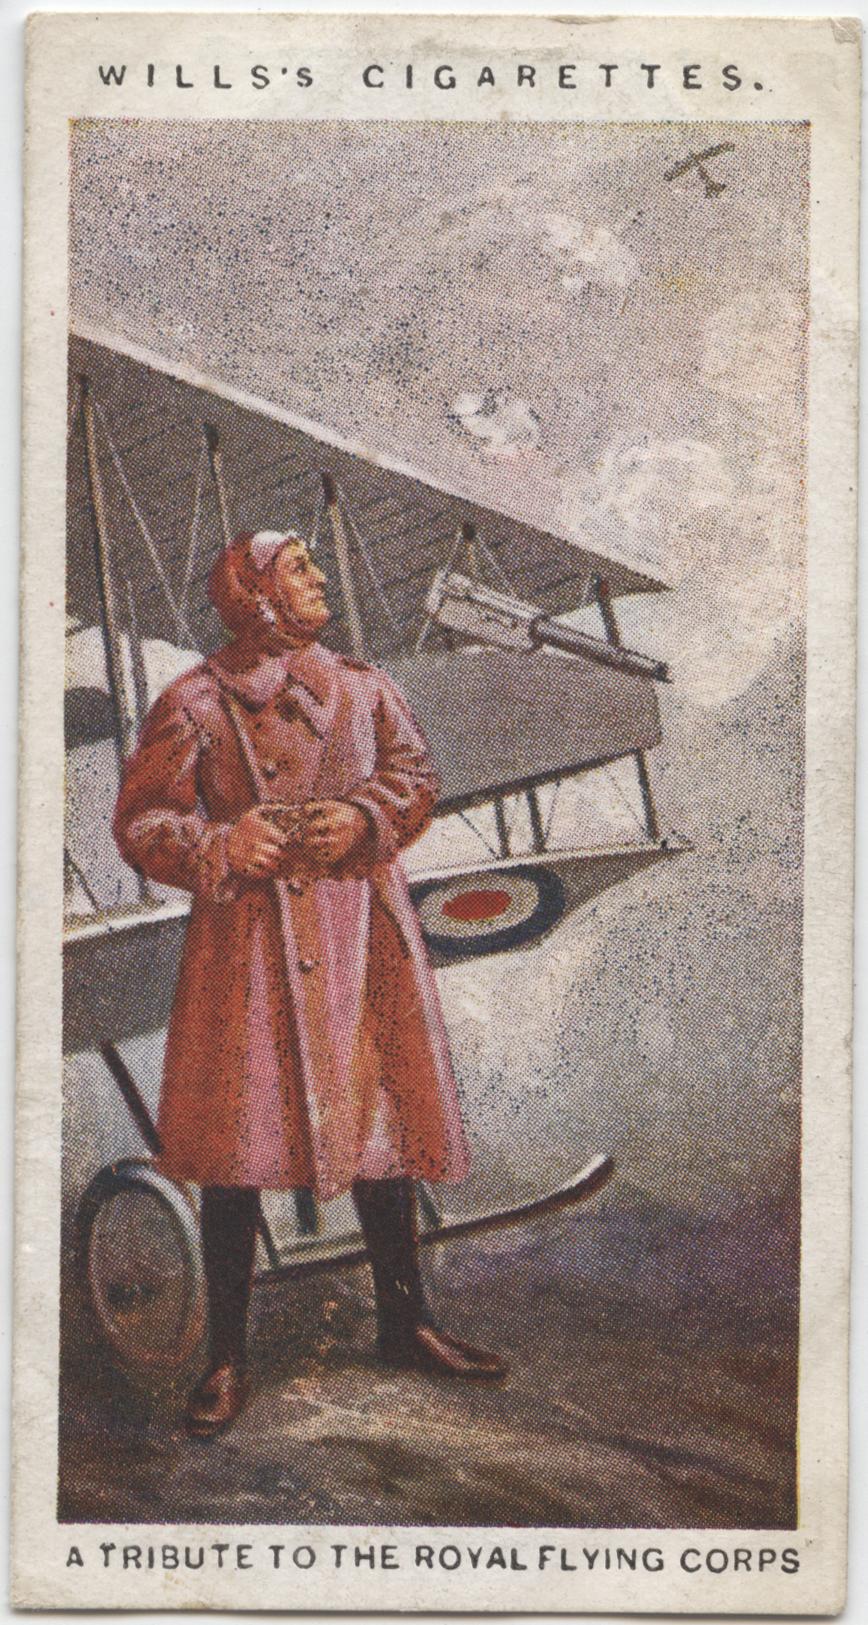 APPENDIX B: Wills Cigarette Card Britain s Part in the War: Royal Flying Corps, Wills